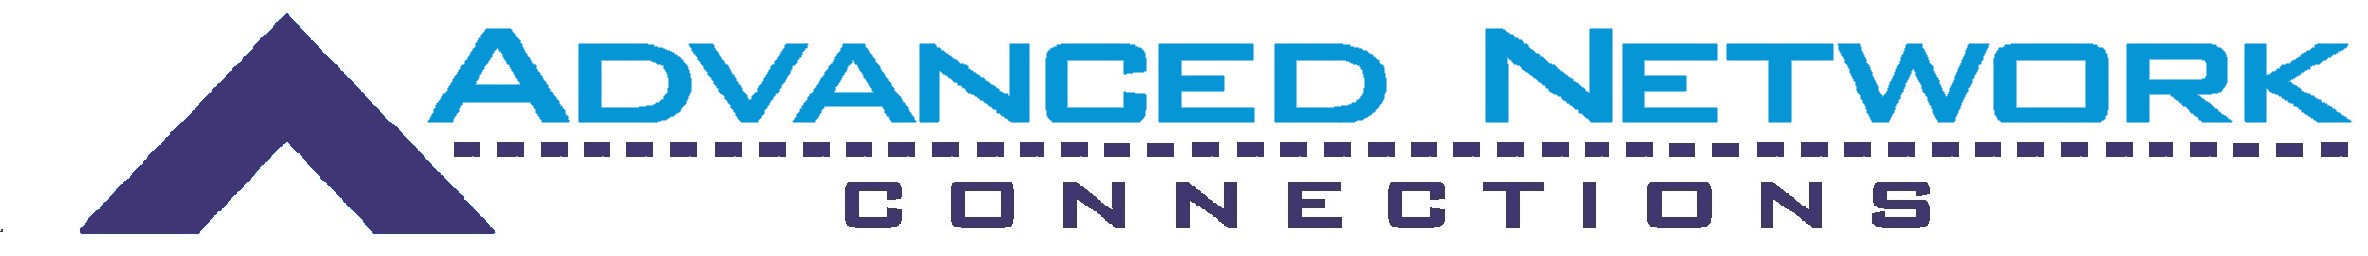 Advanced Network Connections, Inc.